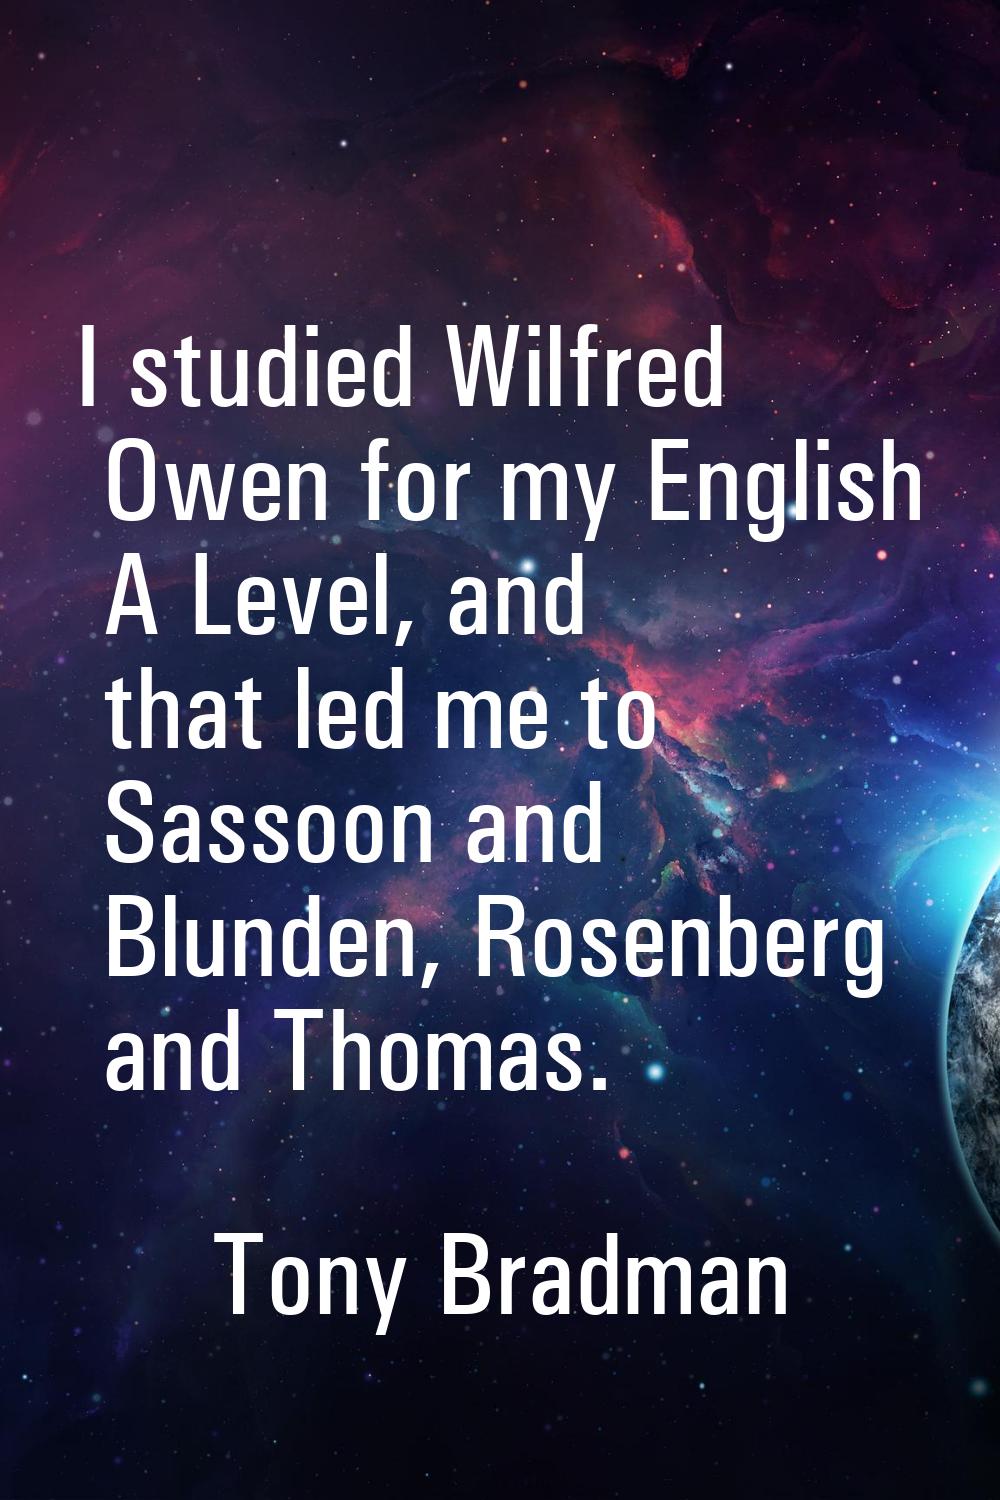 I studied Wilfred Owen for my English A Level, and that led me to Sassoon and Blunden, Rosenberg an